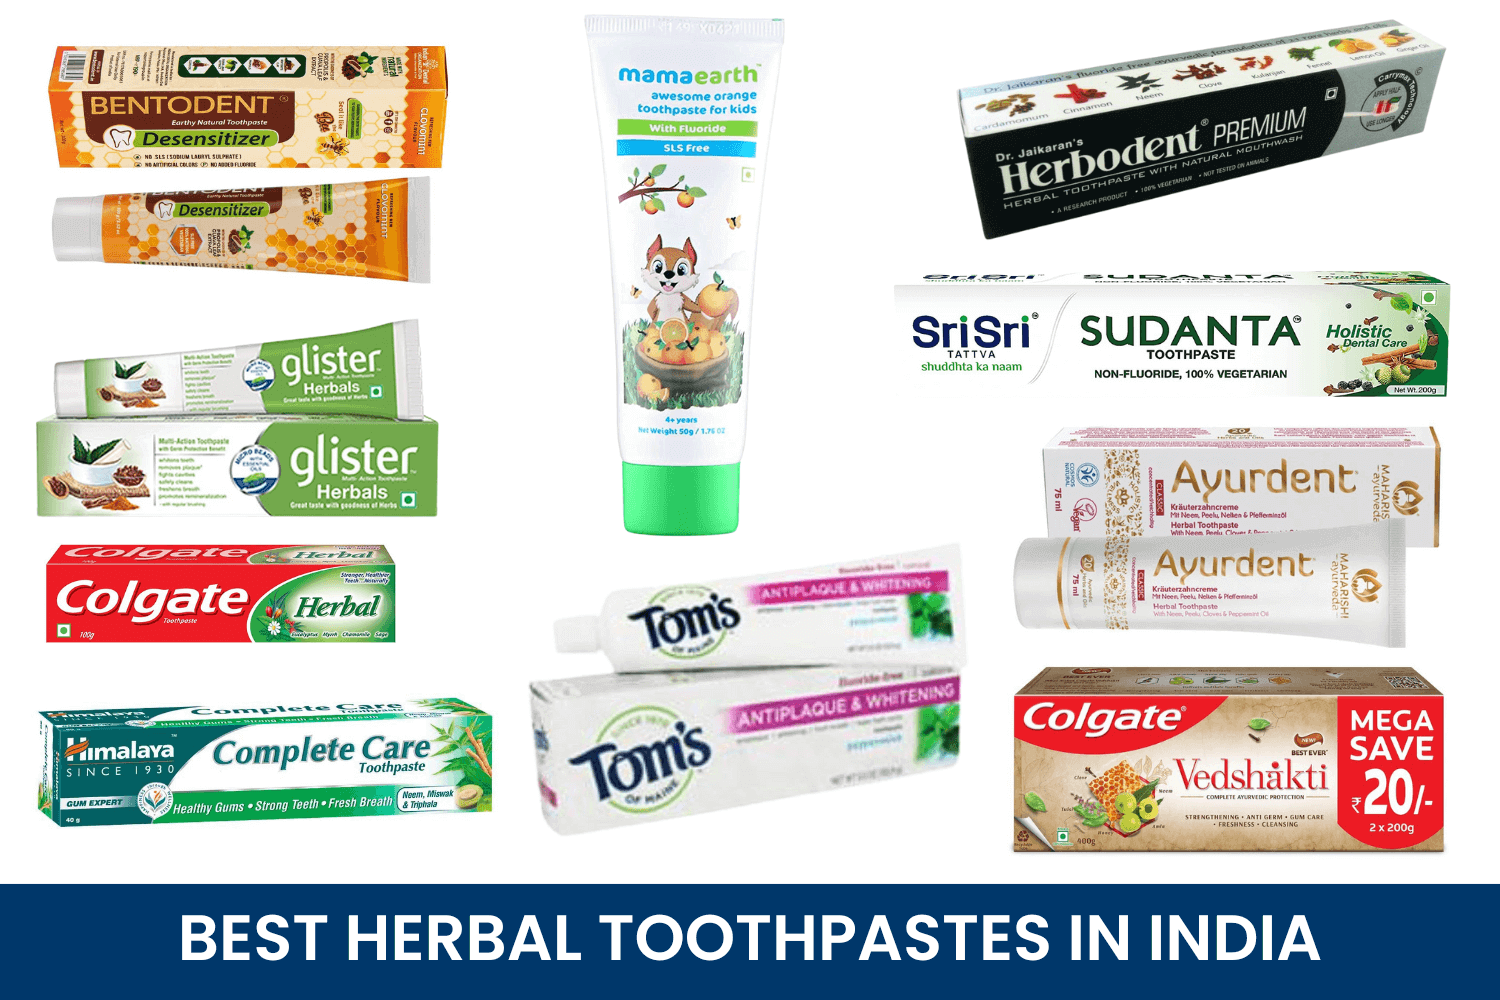 BEST HERBAL TOOTHPASTES IN INDIA